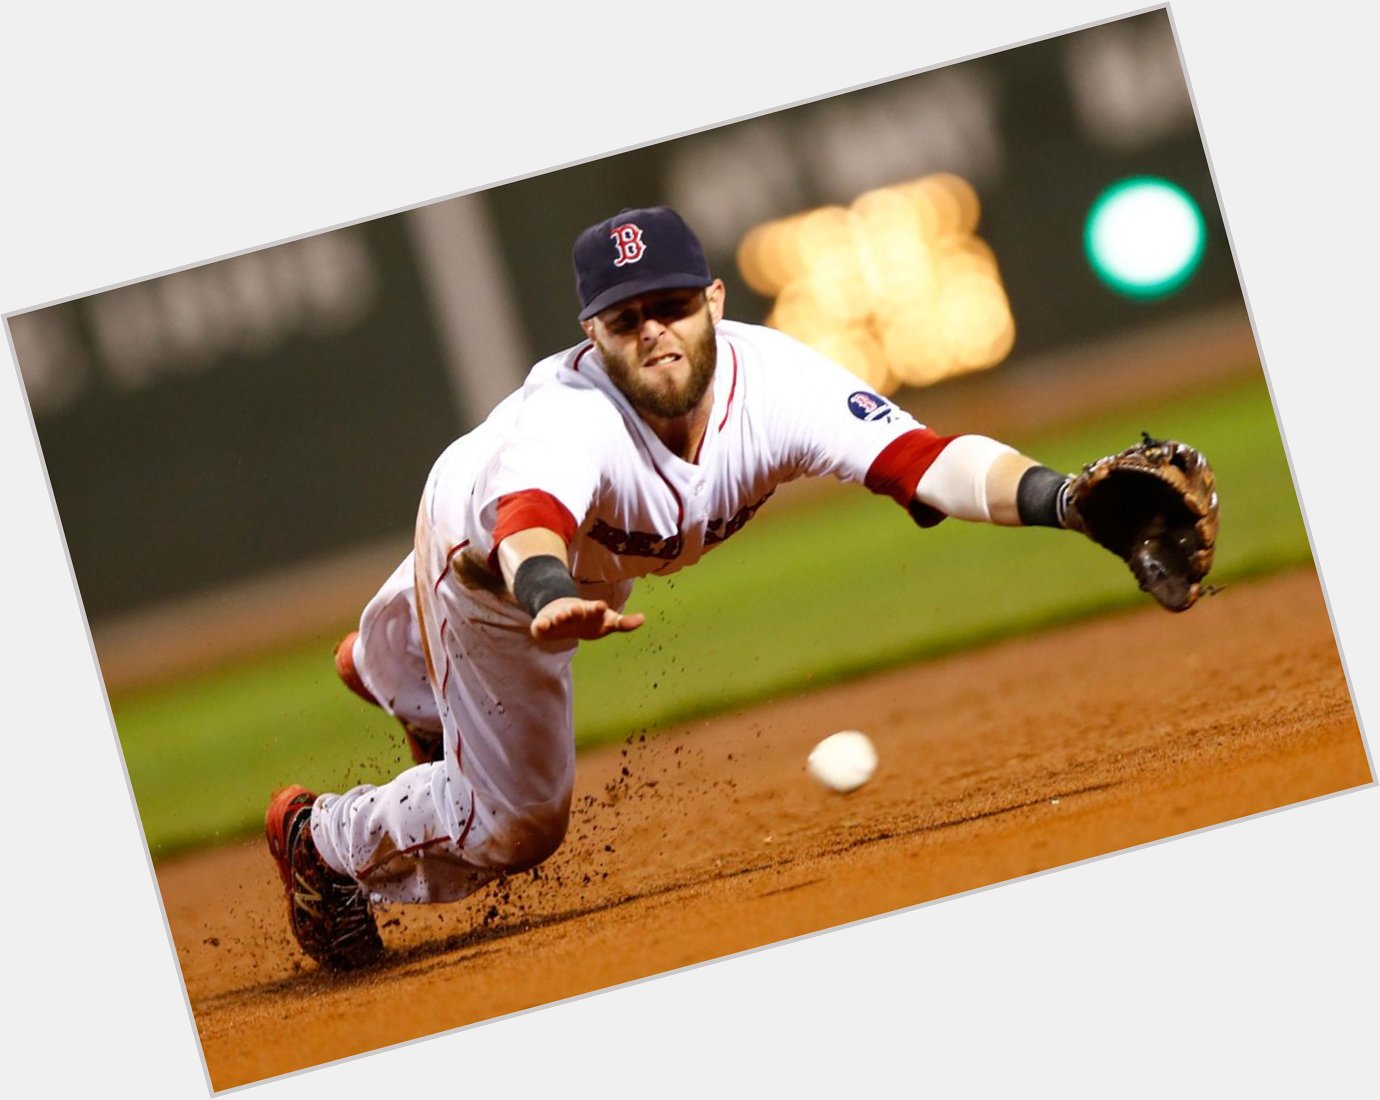 A little late on this (still in before midnight ET!), but Happy 32nd birthday to Dustin Pedroia! 